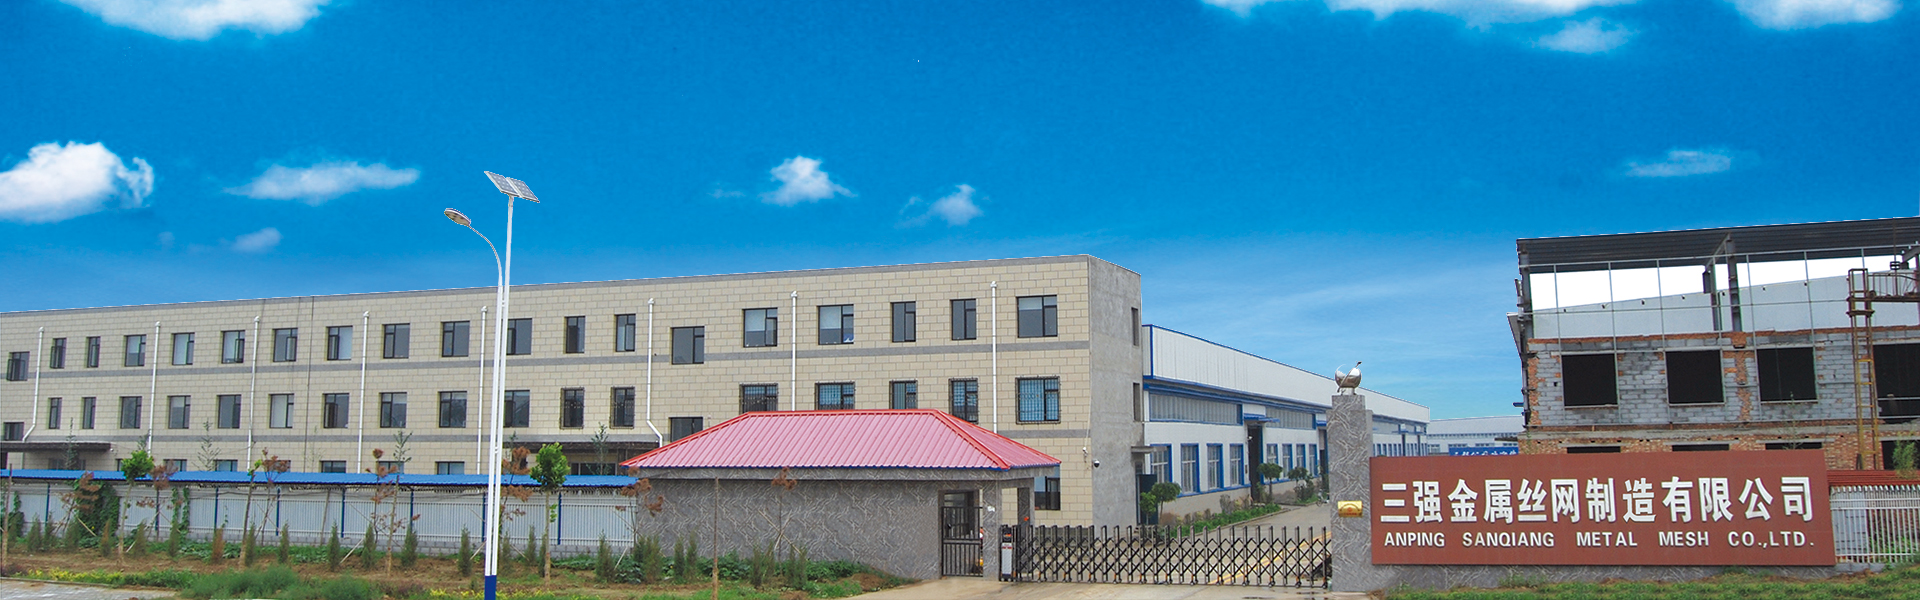 ANPING COUNTY SANQIANG METAL WIRE MESH PRODUCTS CO., LTD. 